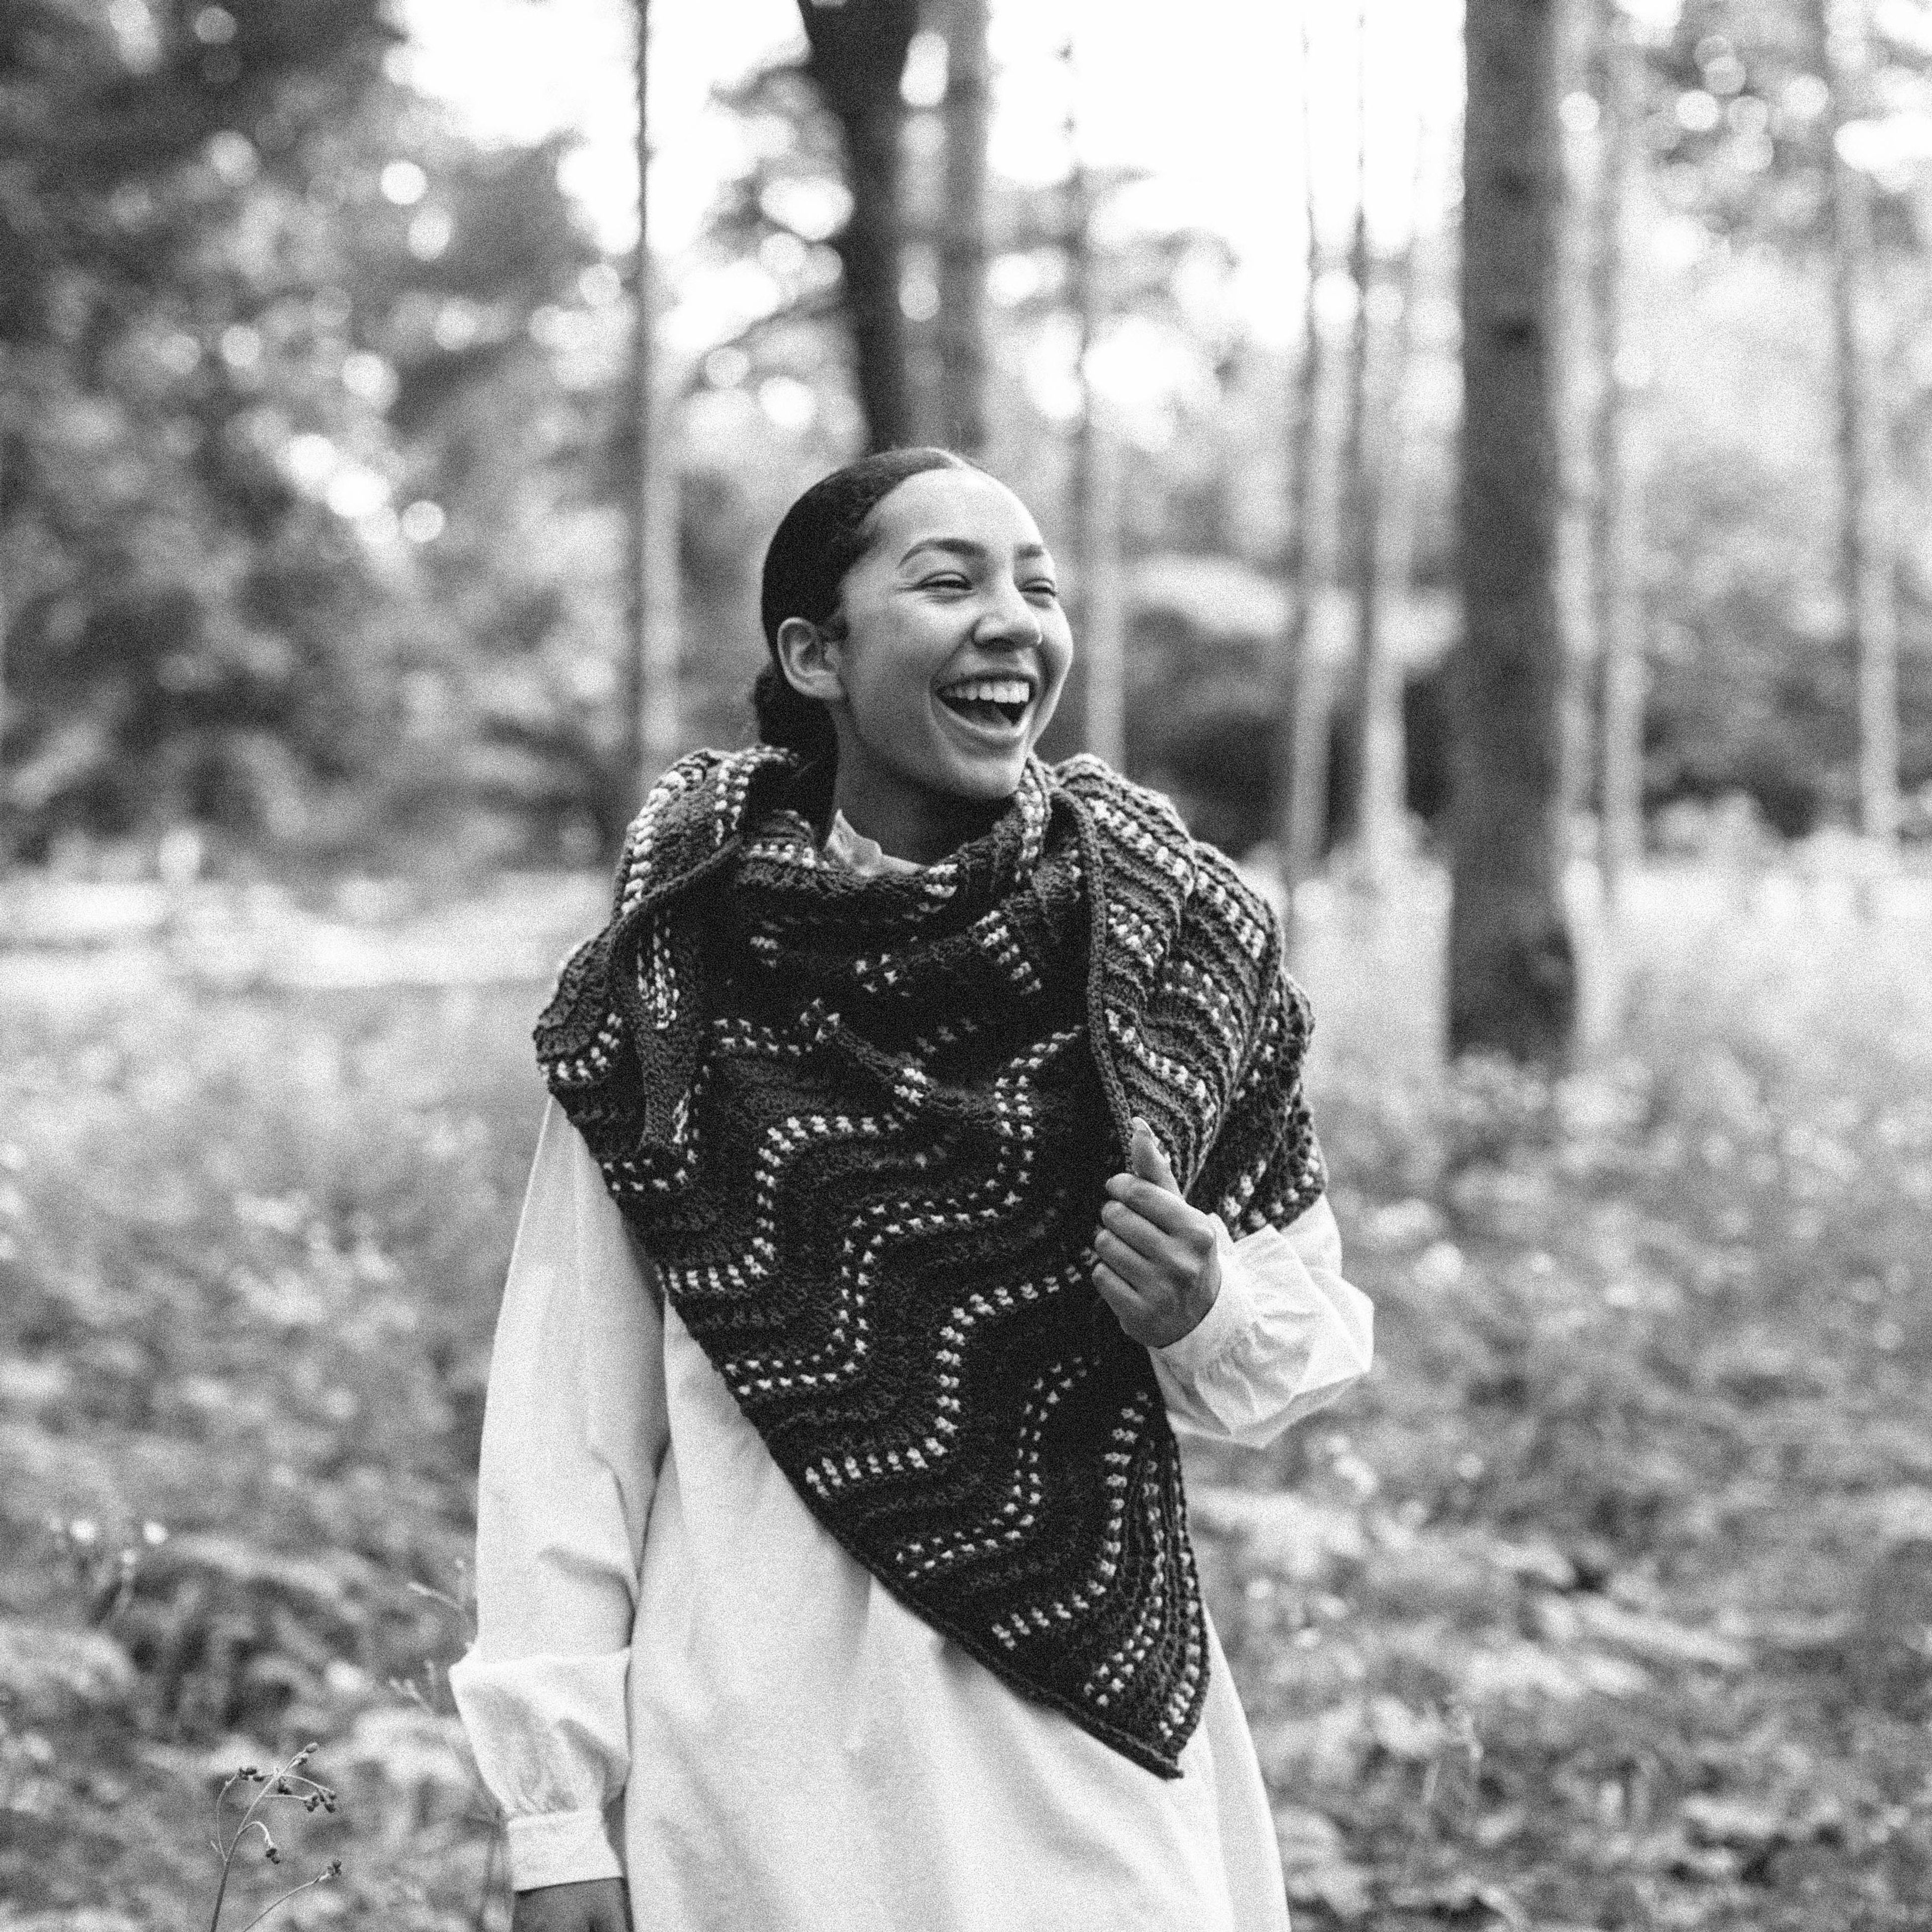 Continuous Wave Shawl